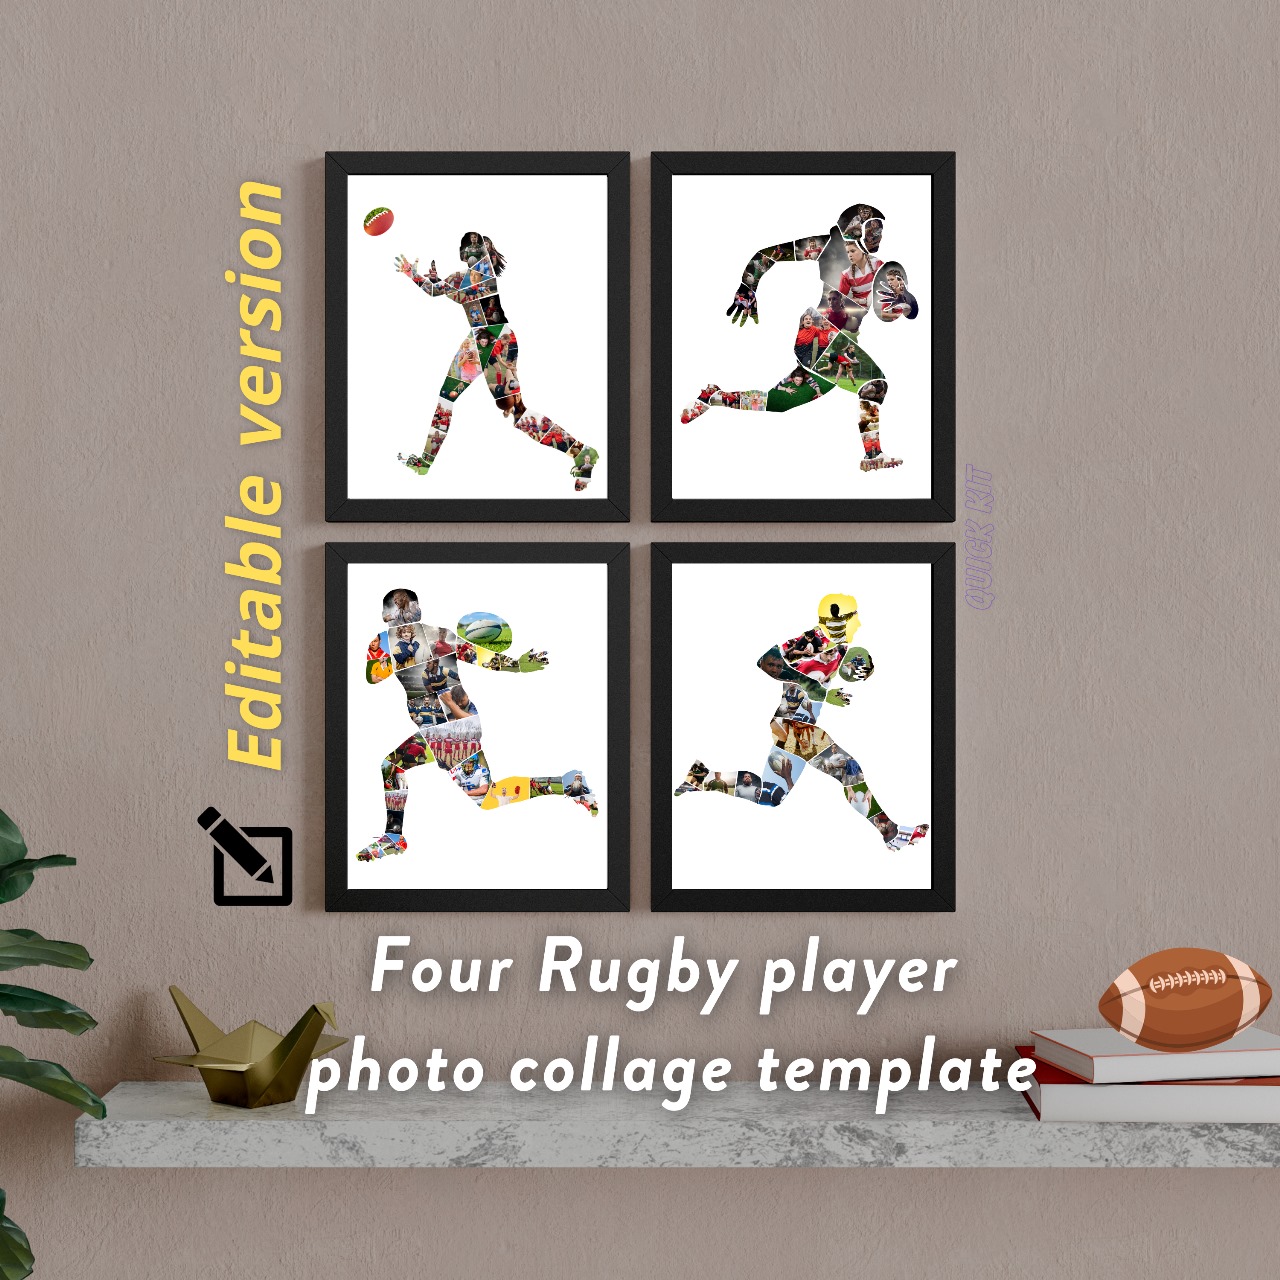 Rugby player photo collage frame template, for gentleman and lady, editable & printable, Rugby player gift, sports player gift, coach gift.